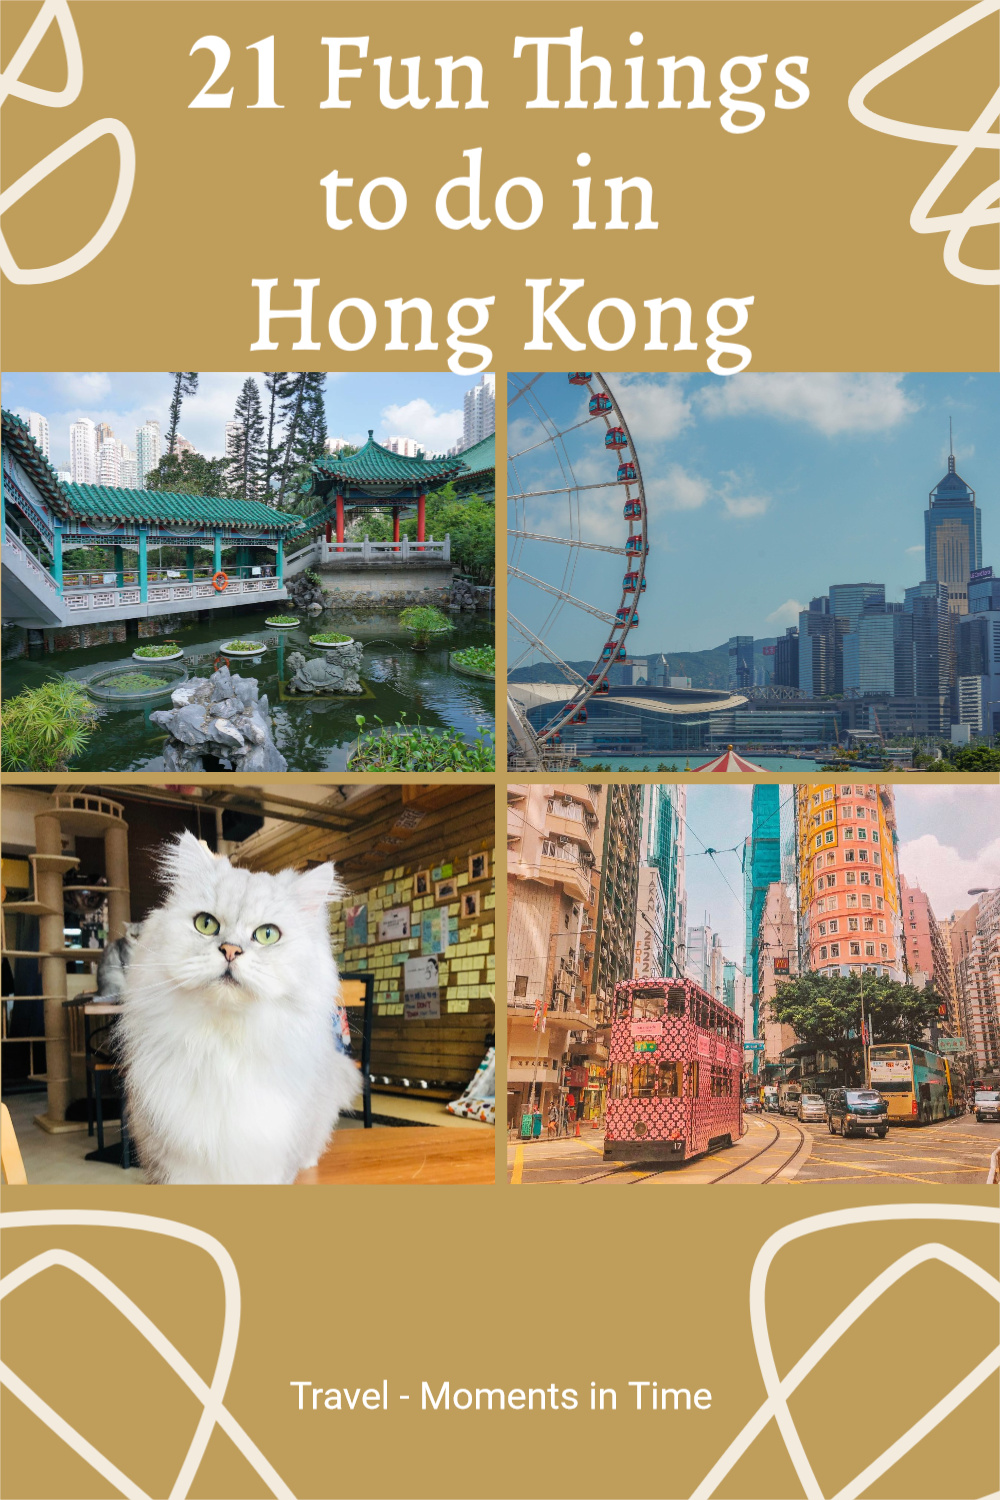 Planning a trip to Hong Kong? Then include these 21 fun things to do in Hong Kong on your Hong Kong itinerary! The best fun activities in Hong Kong for you! #hongkong #hongkongthingstodo #asiatravel #travelmomentsintime #traveldestinations #explore #travelblogger #traveling